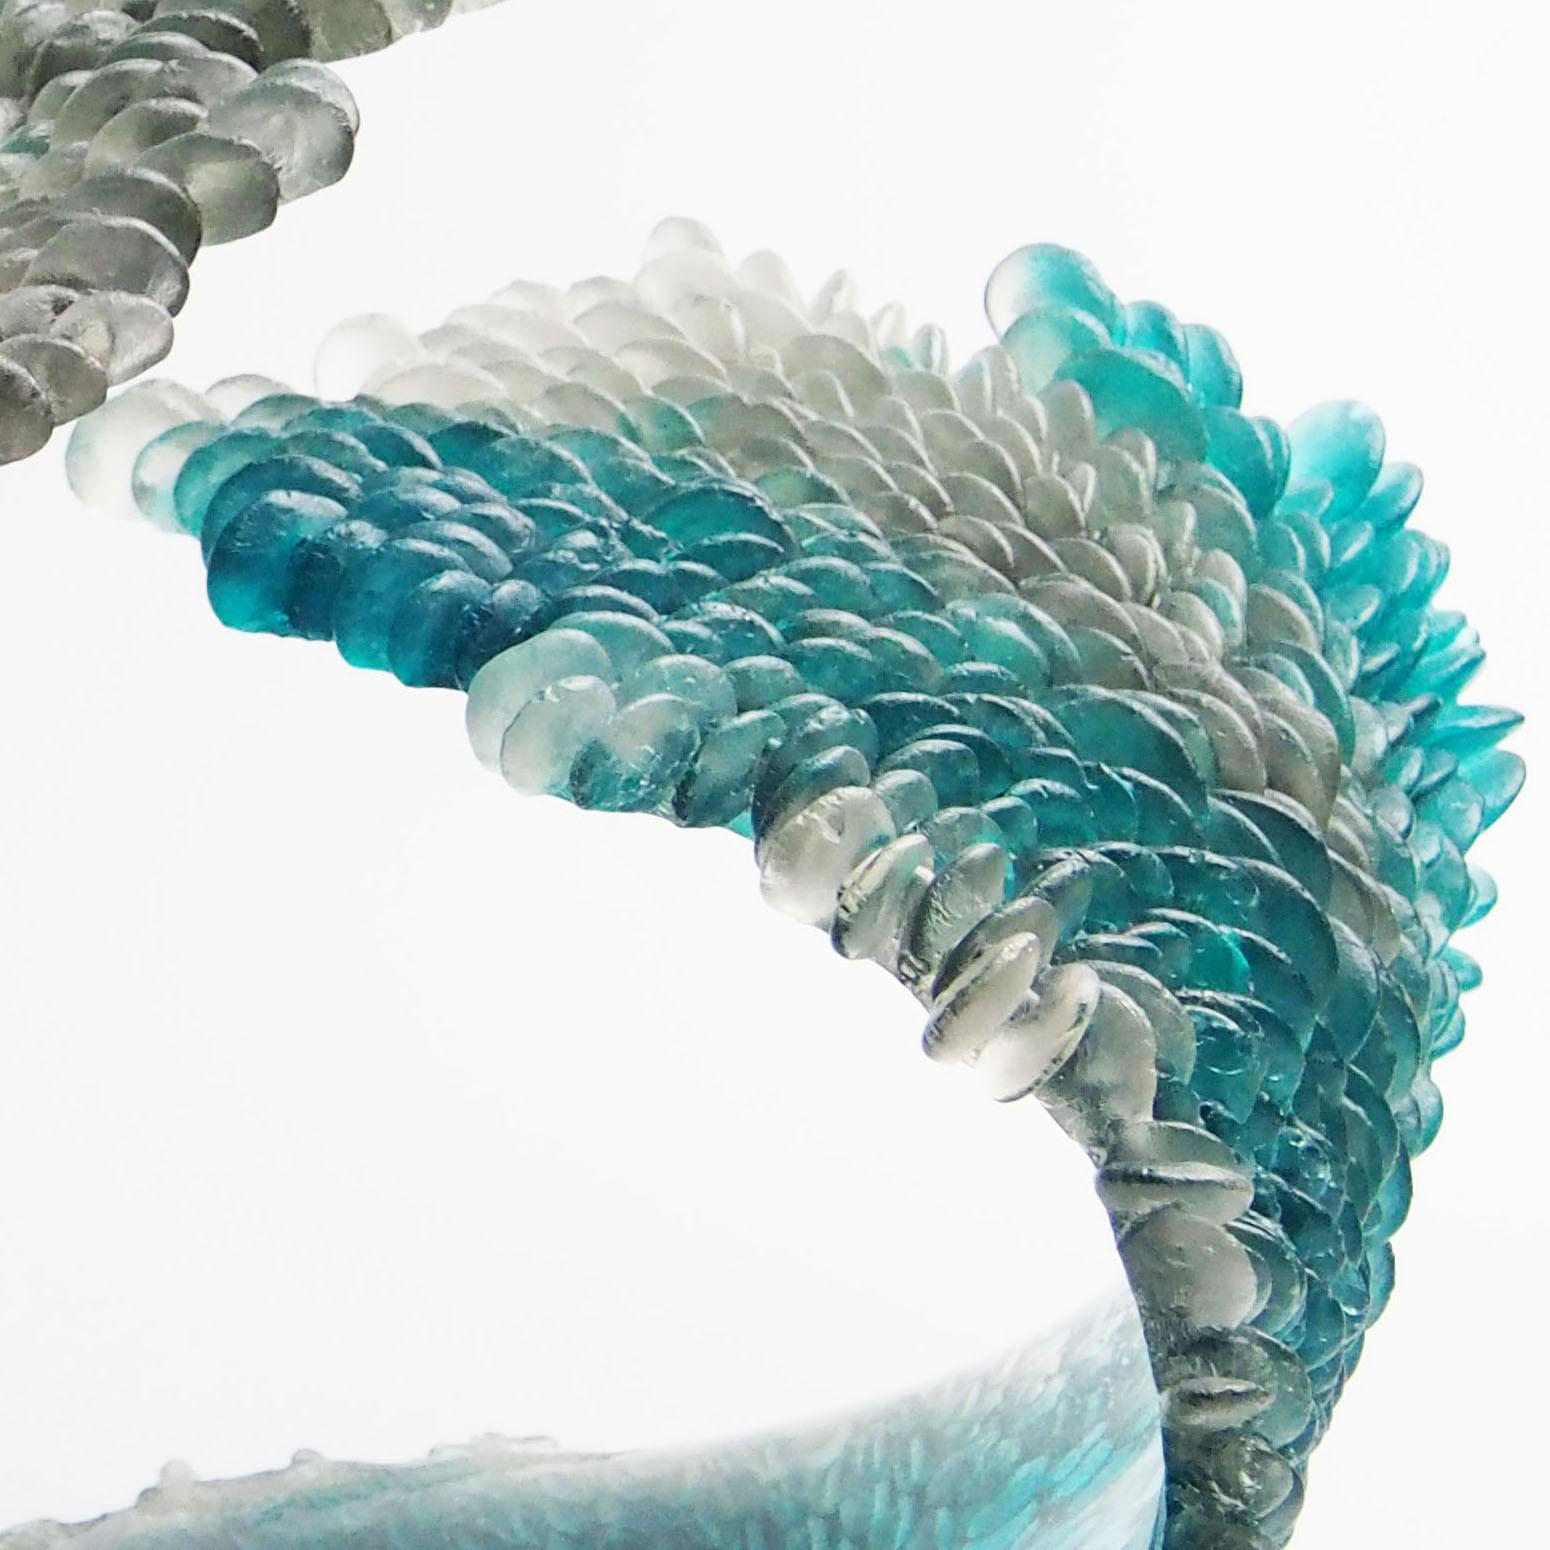 Alliform II, a Unique Glass Sculpture in Clear and Teal by Nina Casson McGarva 2